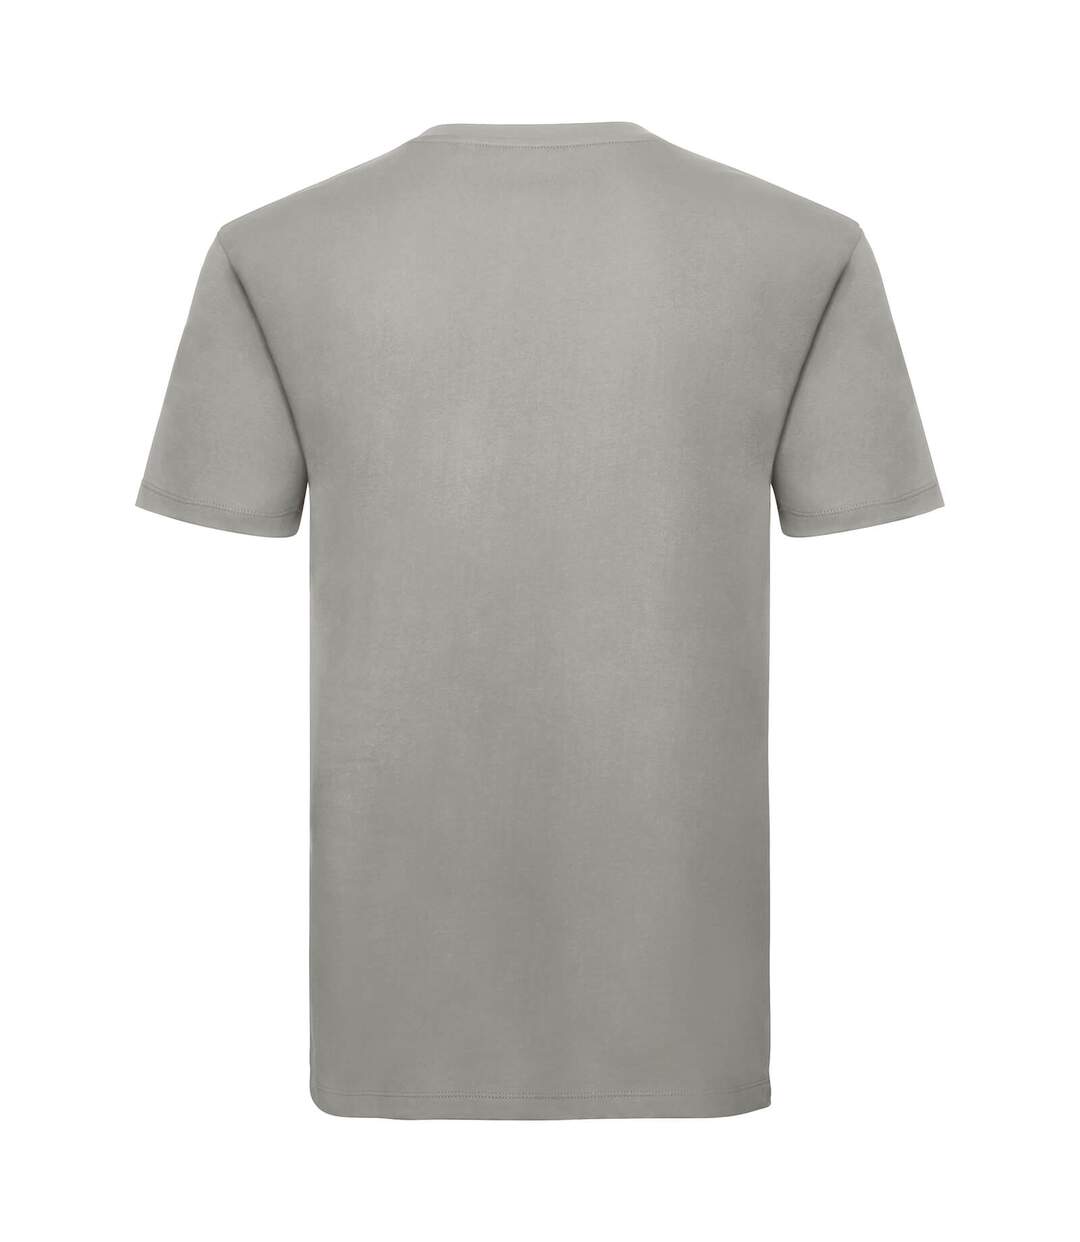 Russell - T-shirt manches courtes - Homme (Gris) - UTBC4713